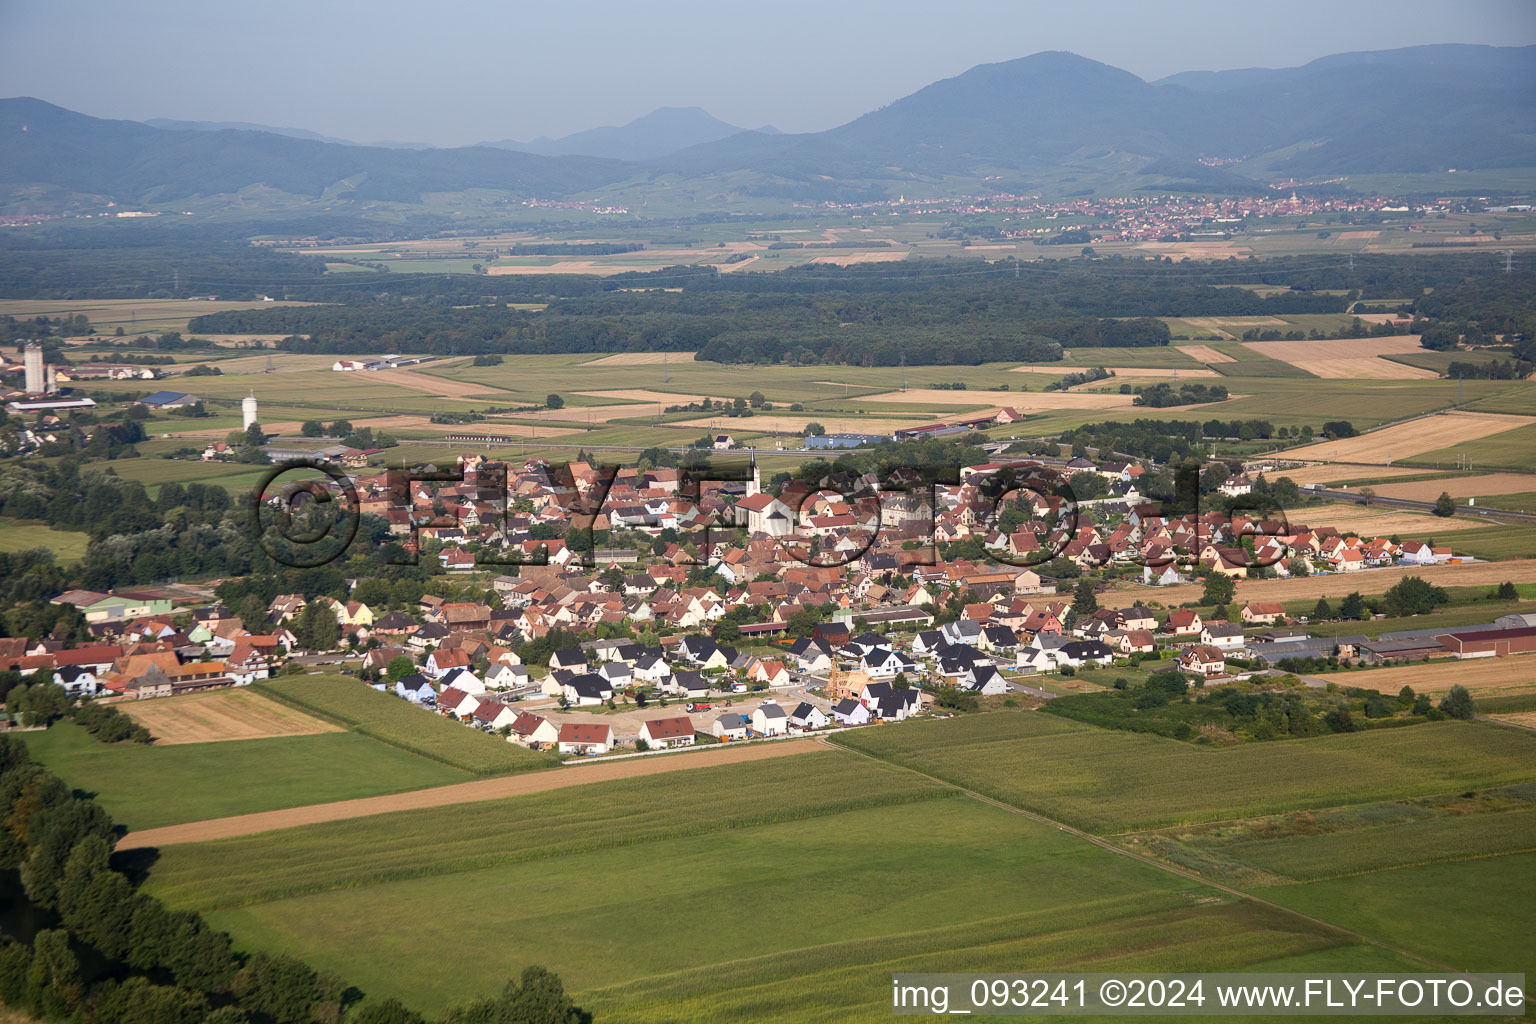 Aerial view of Village on the river bank areas of the river Ill in Sermersheim in Grand Est, France